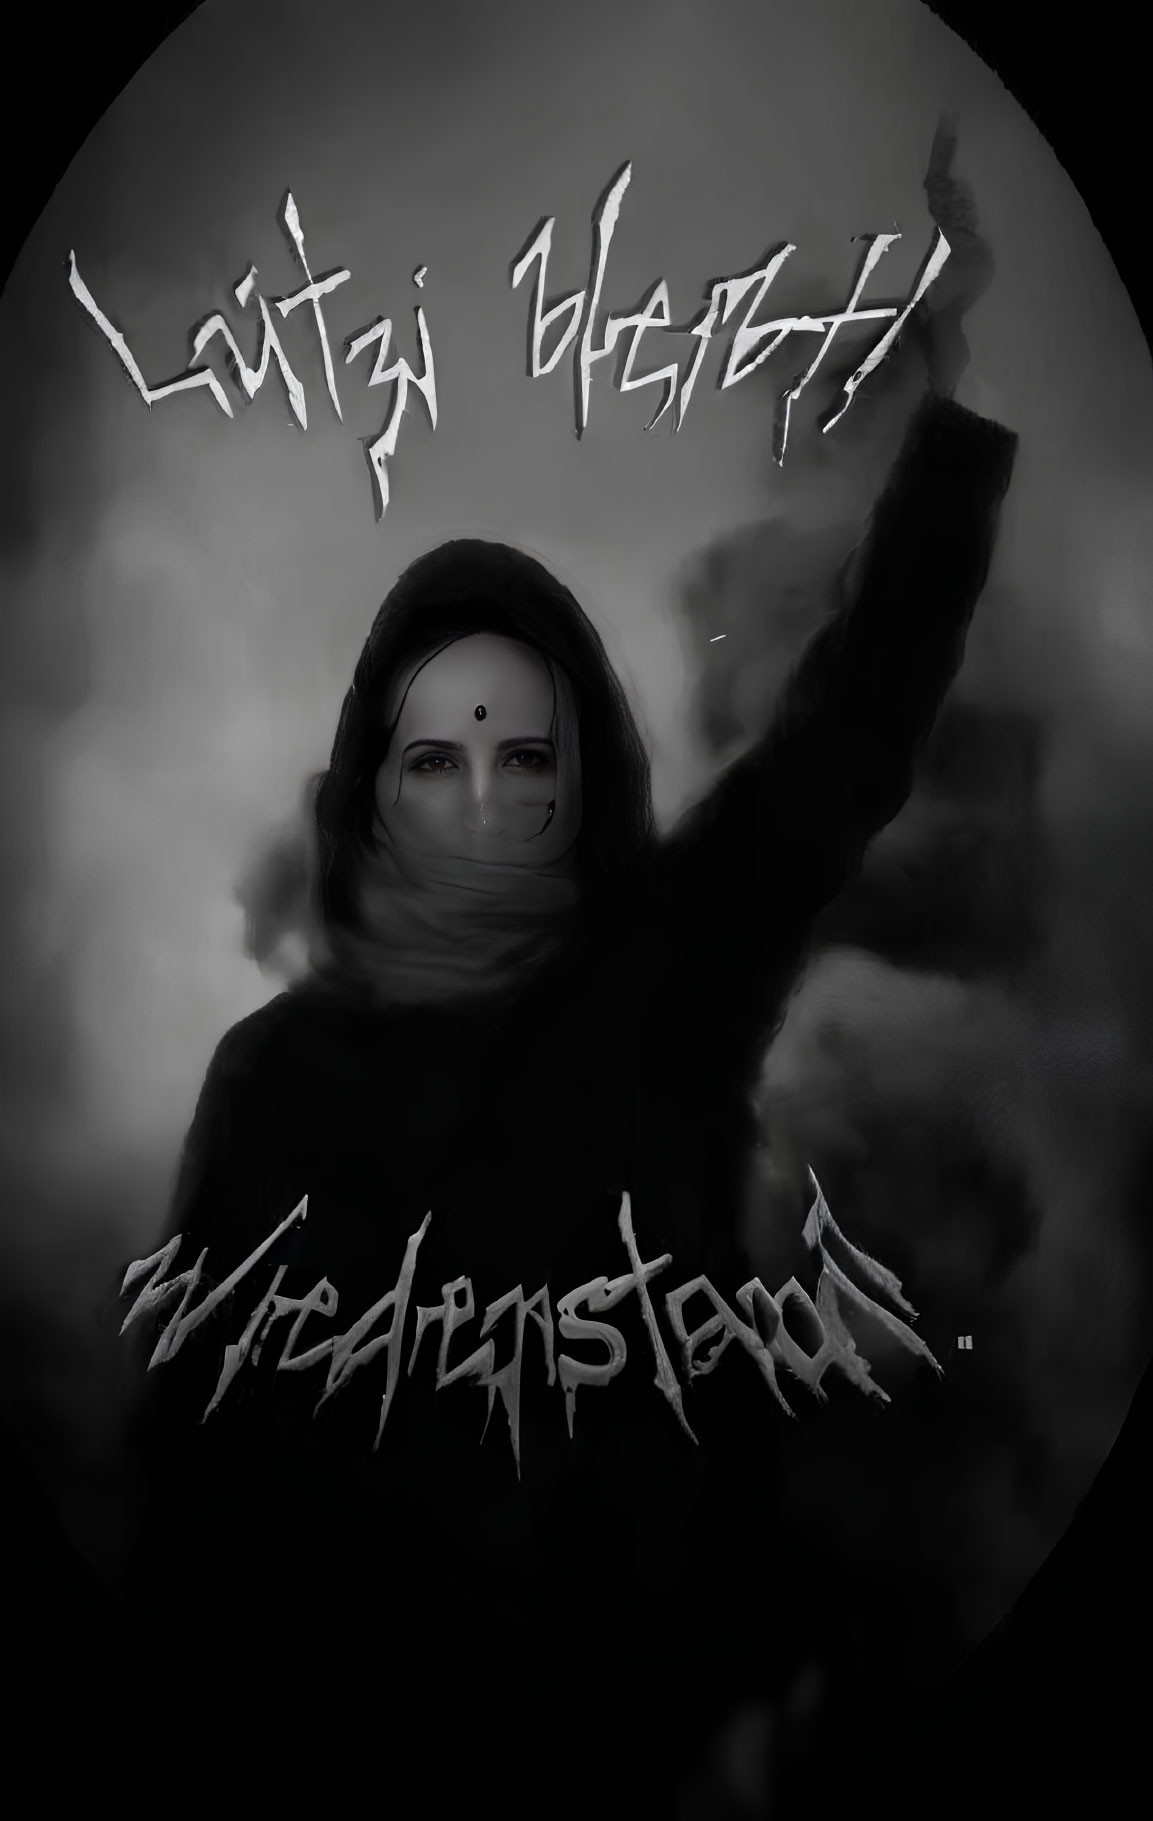 Monochrome image of mysterious figure with obscured eyes and face mask, raising fist